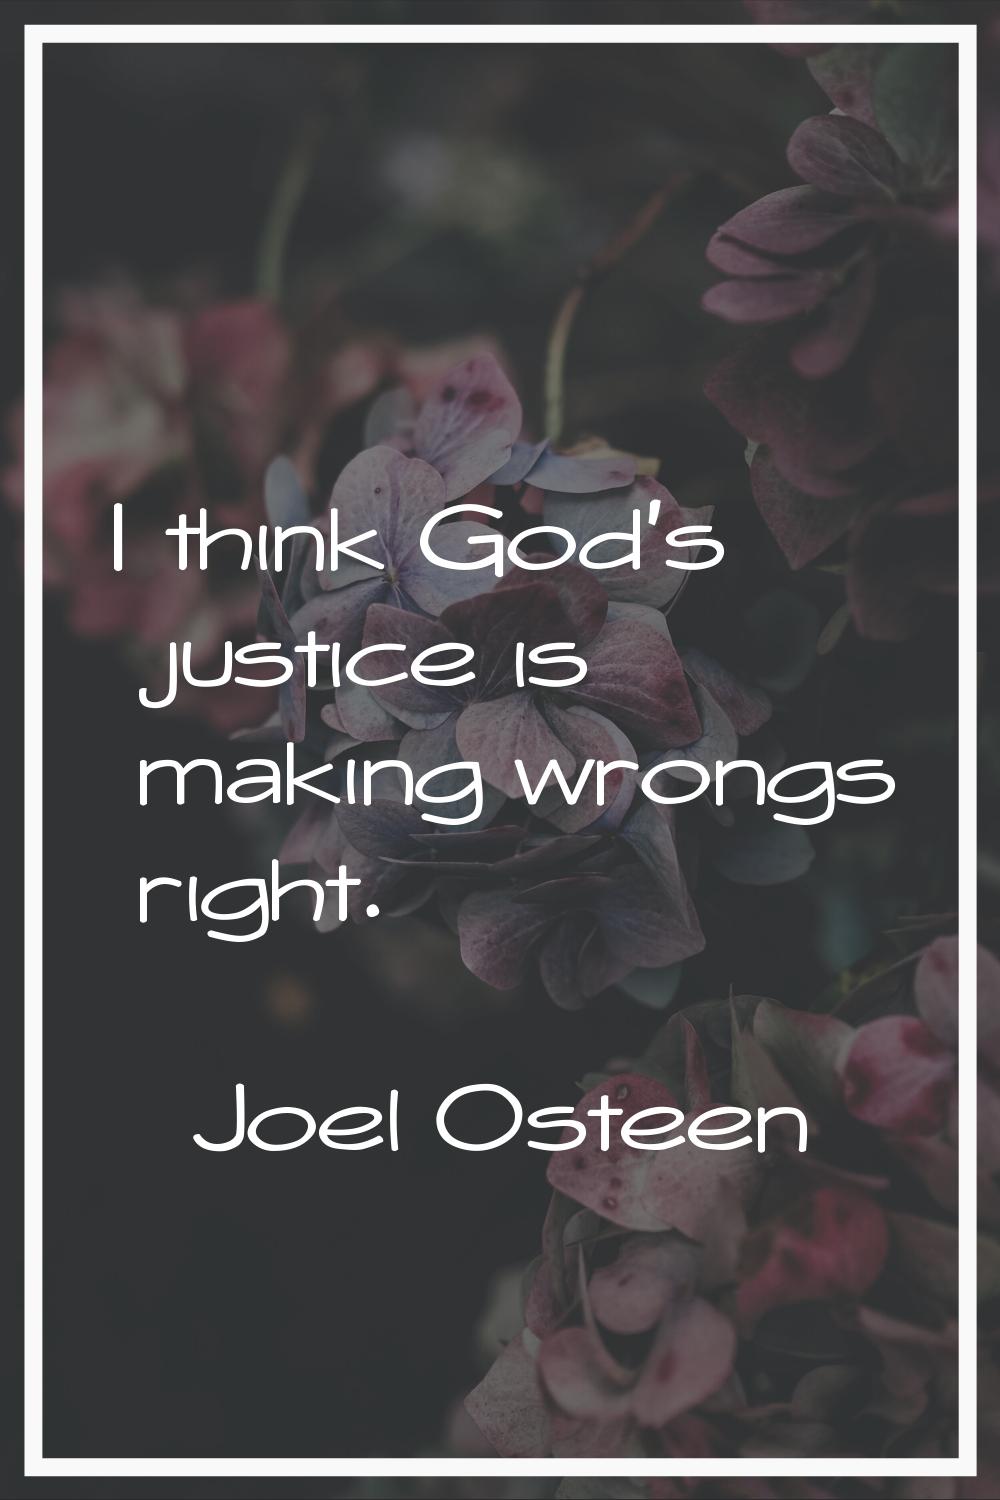 I think God's justice is making wrongs right.